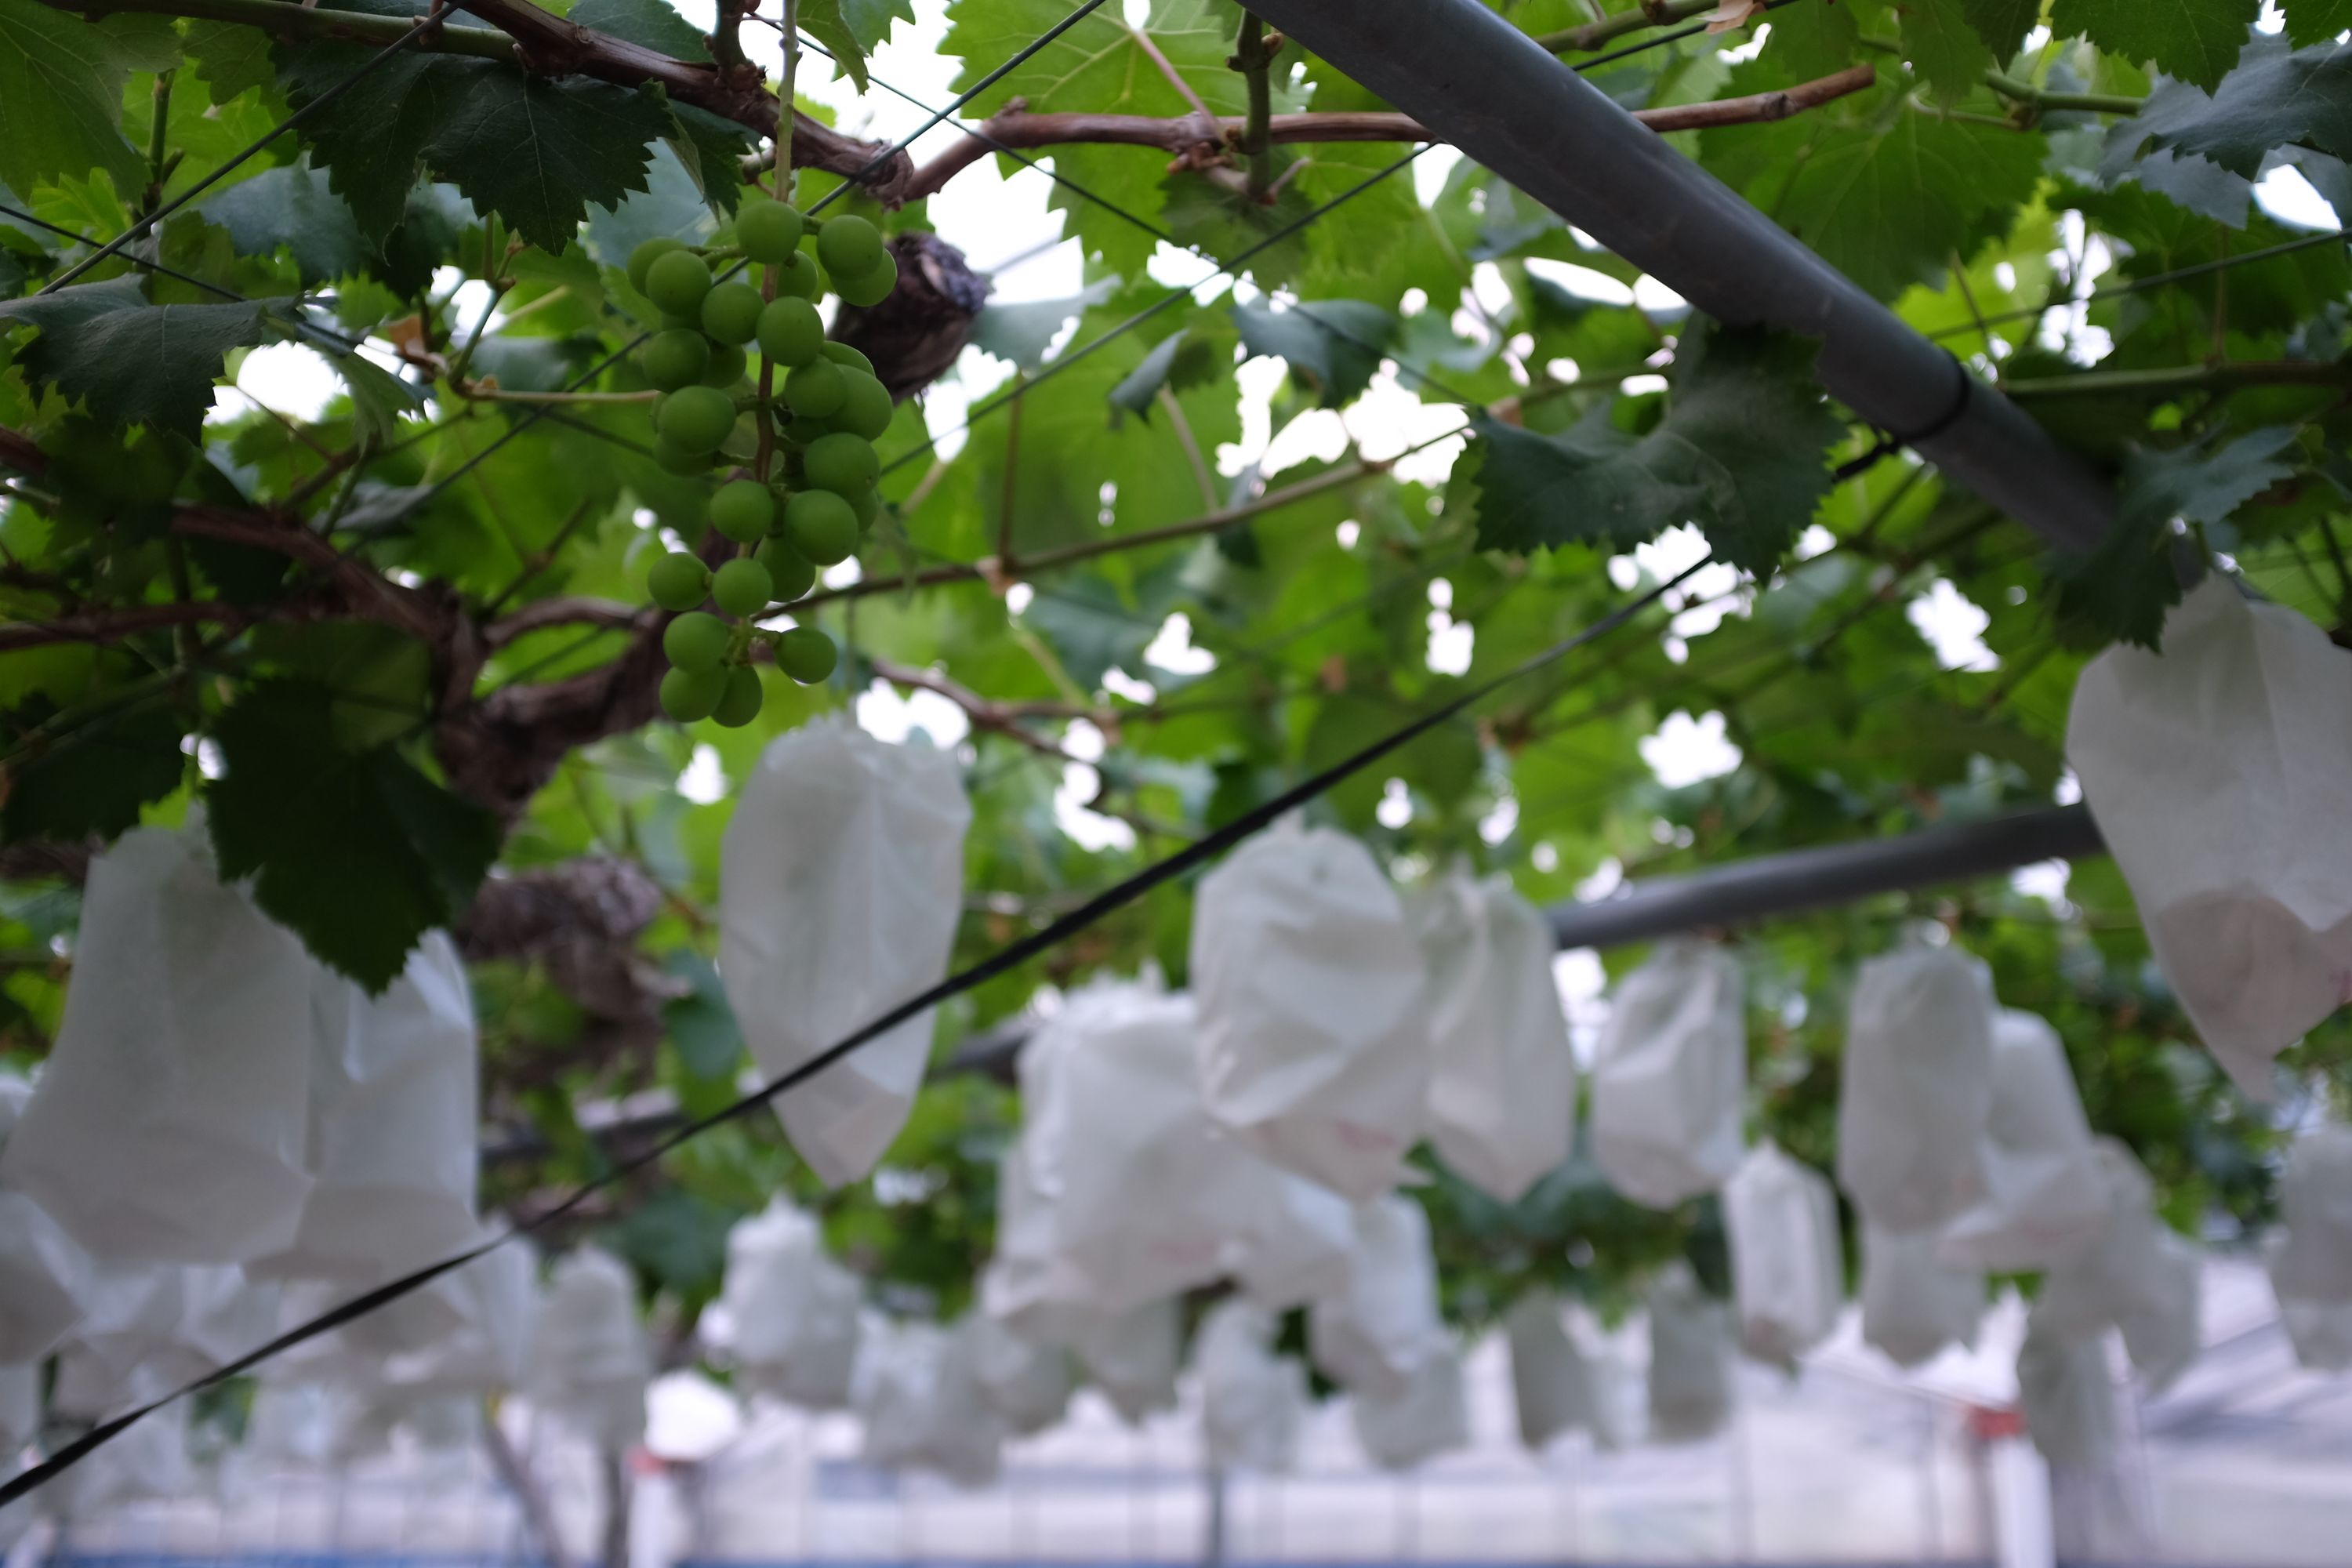 Bunches of grapes hang from the vine, most of them packaged in paper.